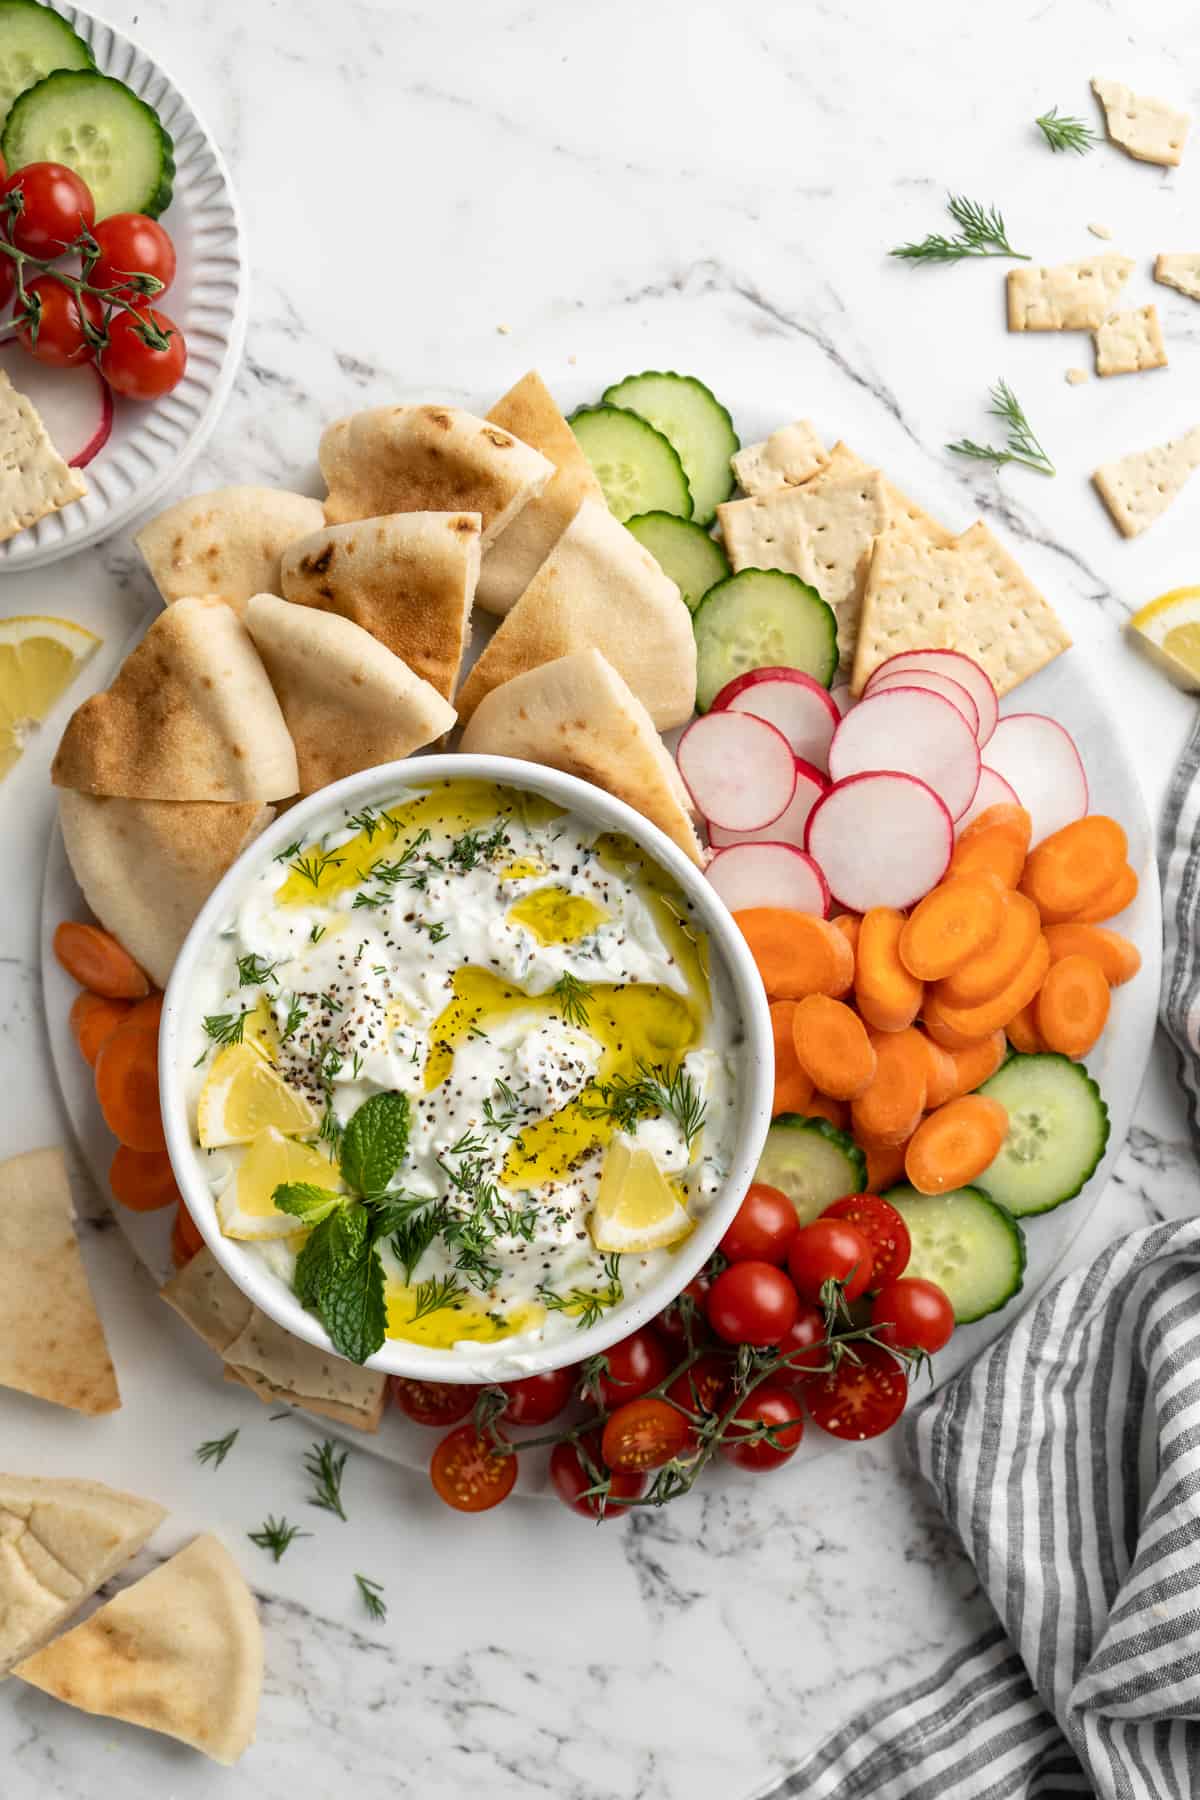 Overhead view of tzatziki in bowl on platter with vegetables, pita, and crackers